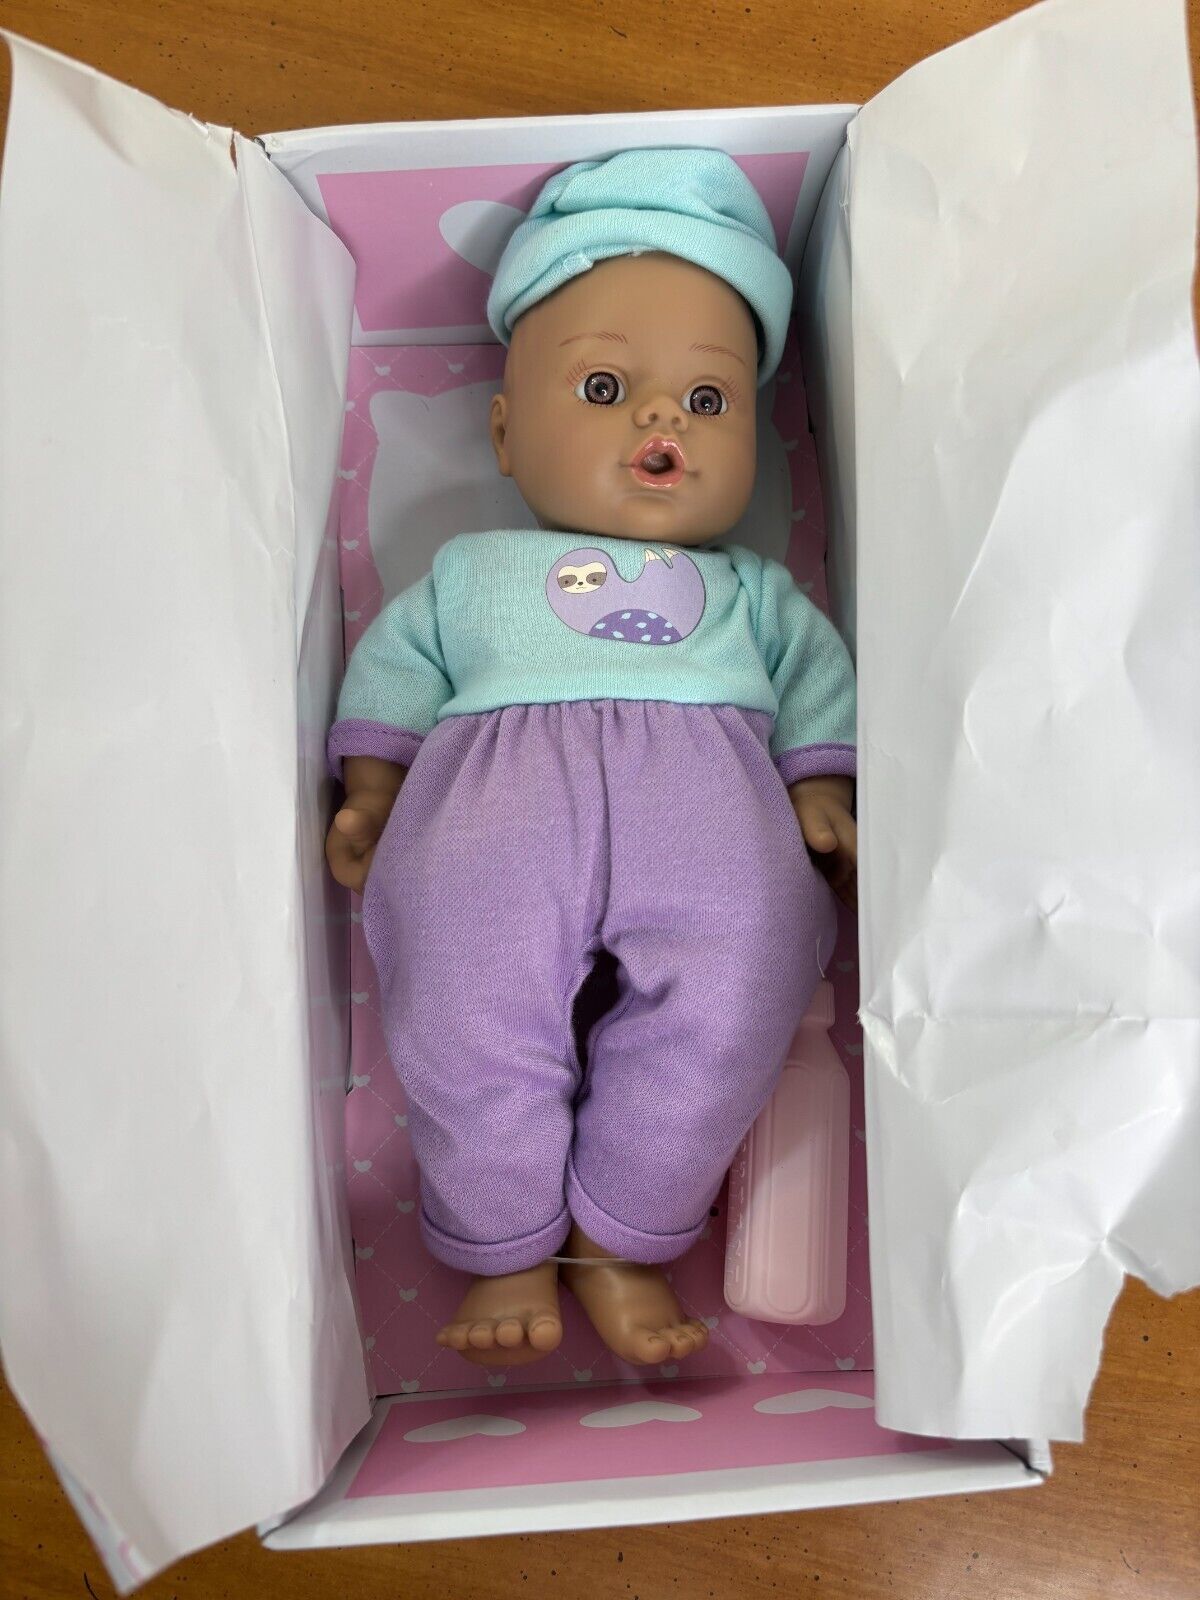 Adora Sweet Baby Doll 11” w/ Purple Outfit & Bottle - New But Missing Box Top - $21.95